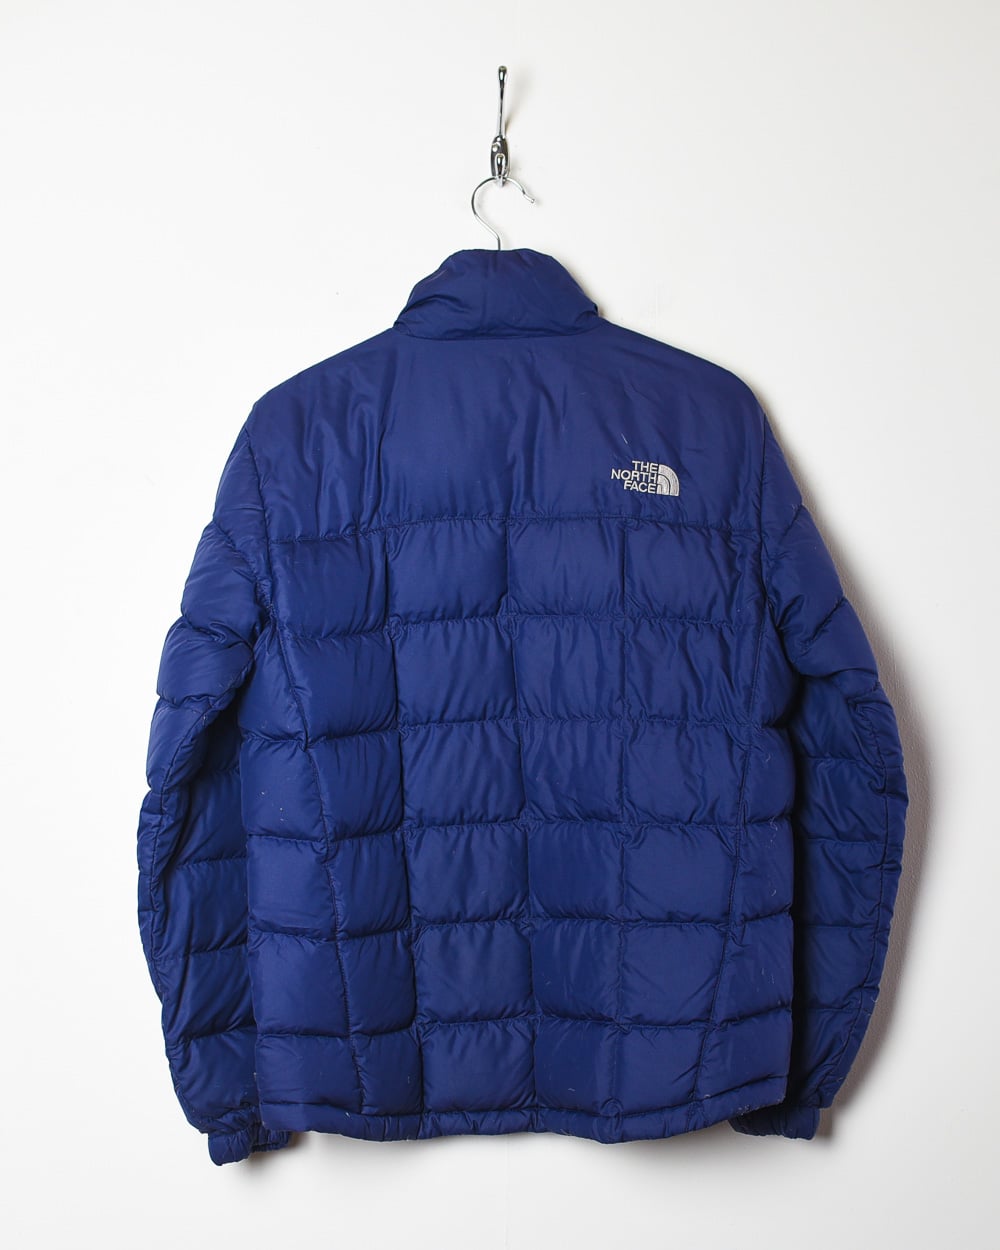 Navy The North Face Summit Series 800 Down Puffer Jacket - Small